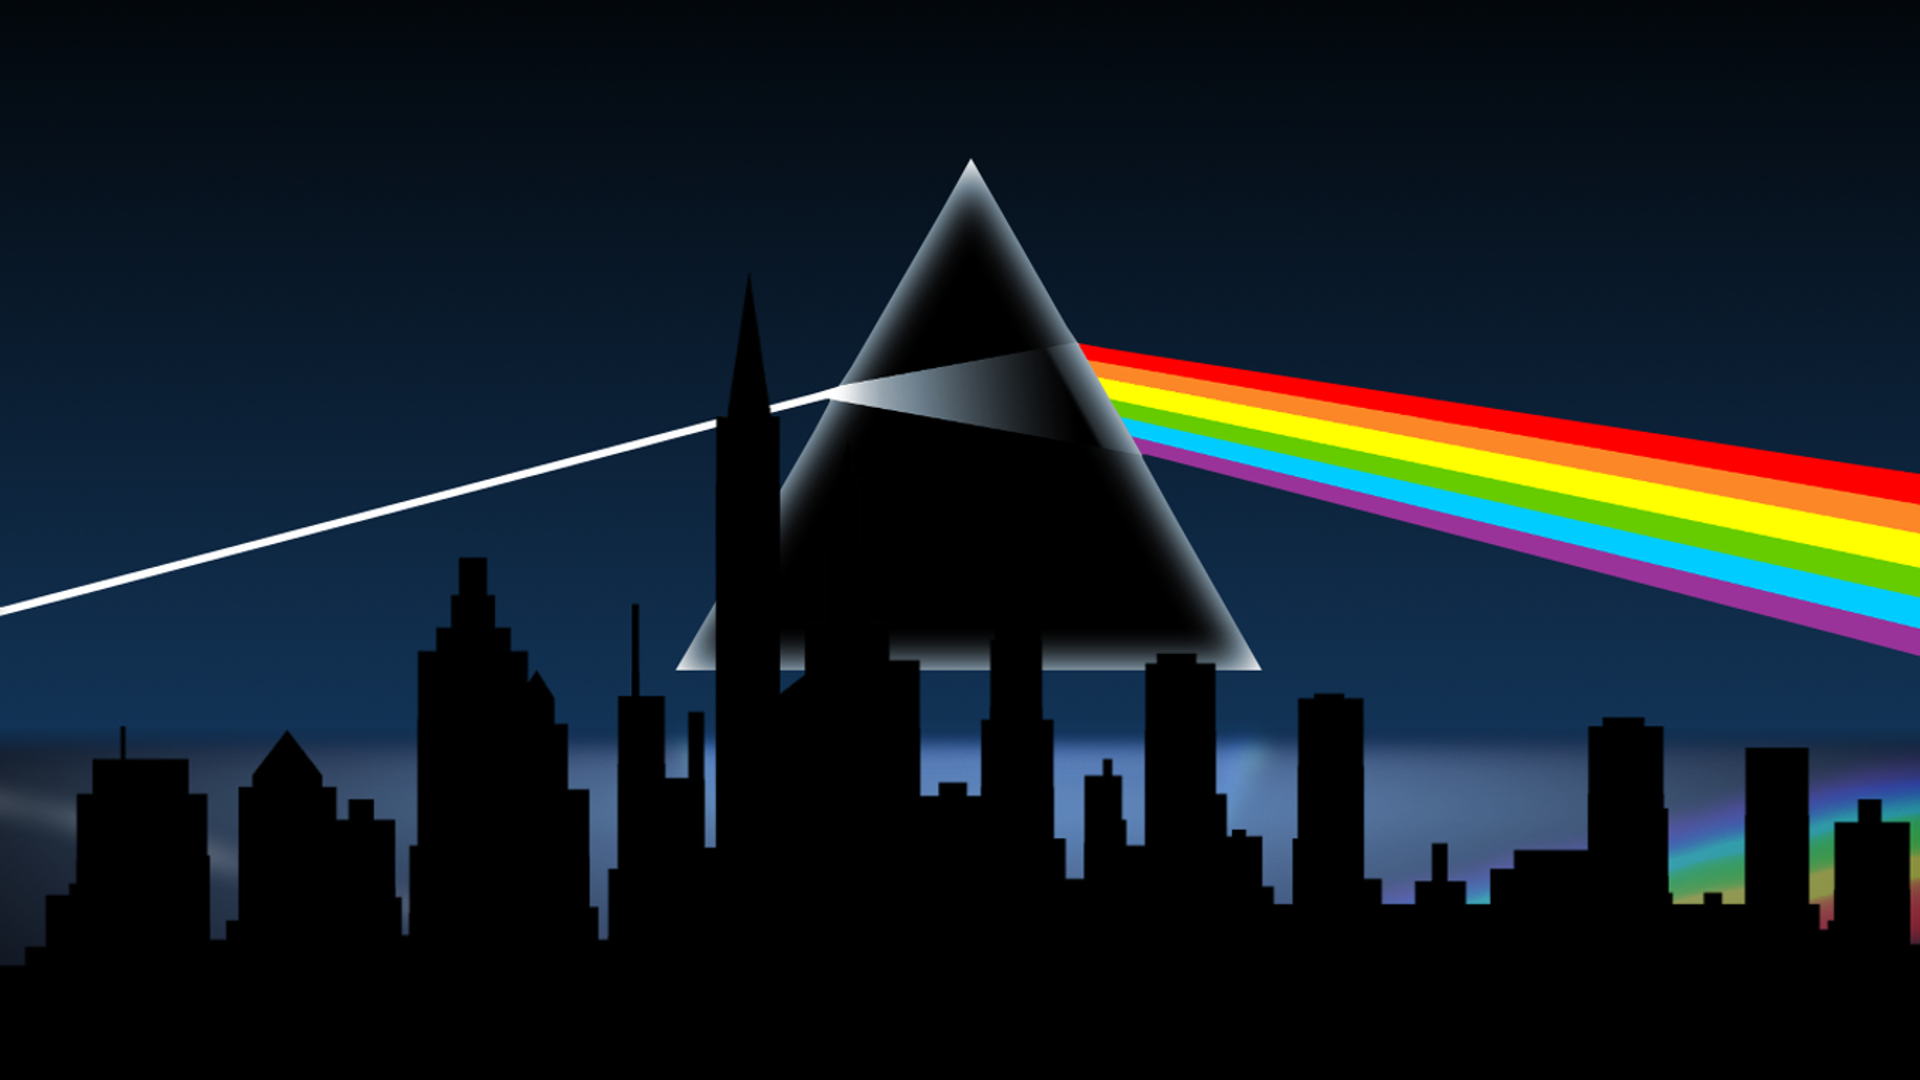 Pink Floyd Album Covers Abstract Silhouette 1920x1080